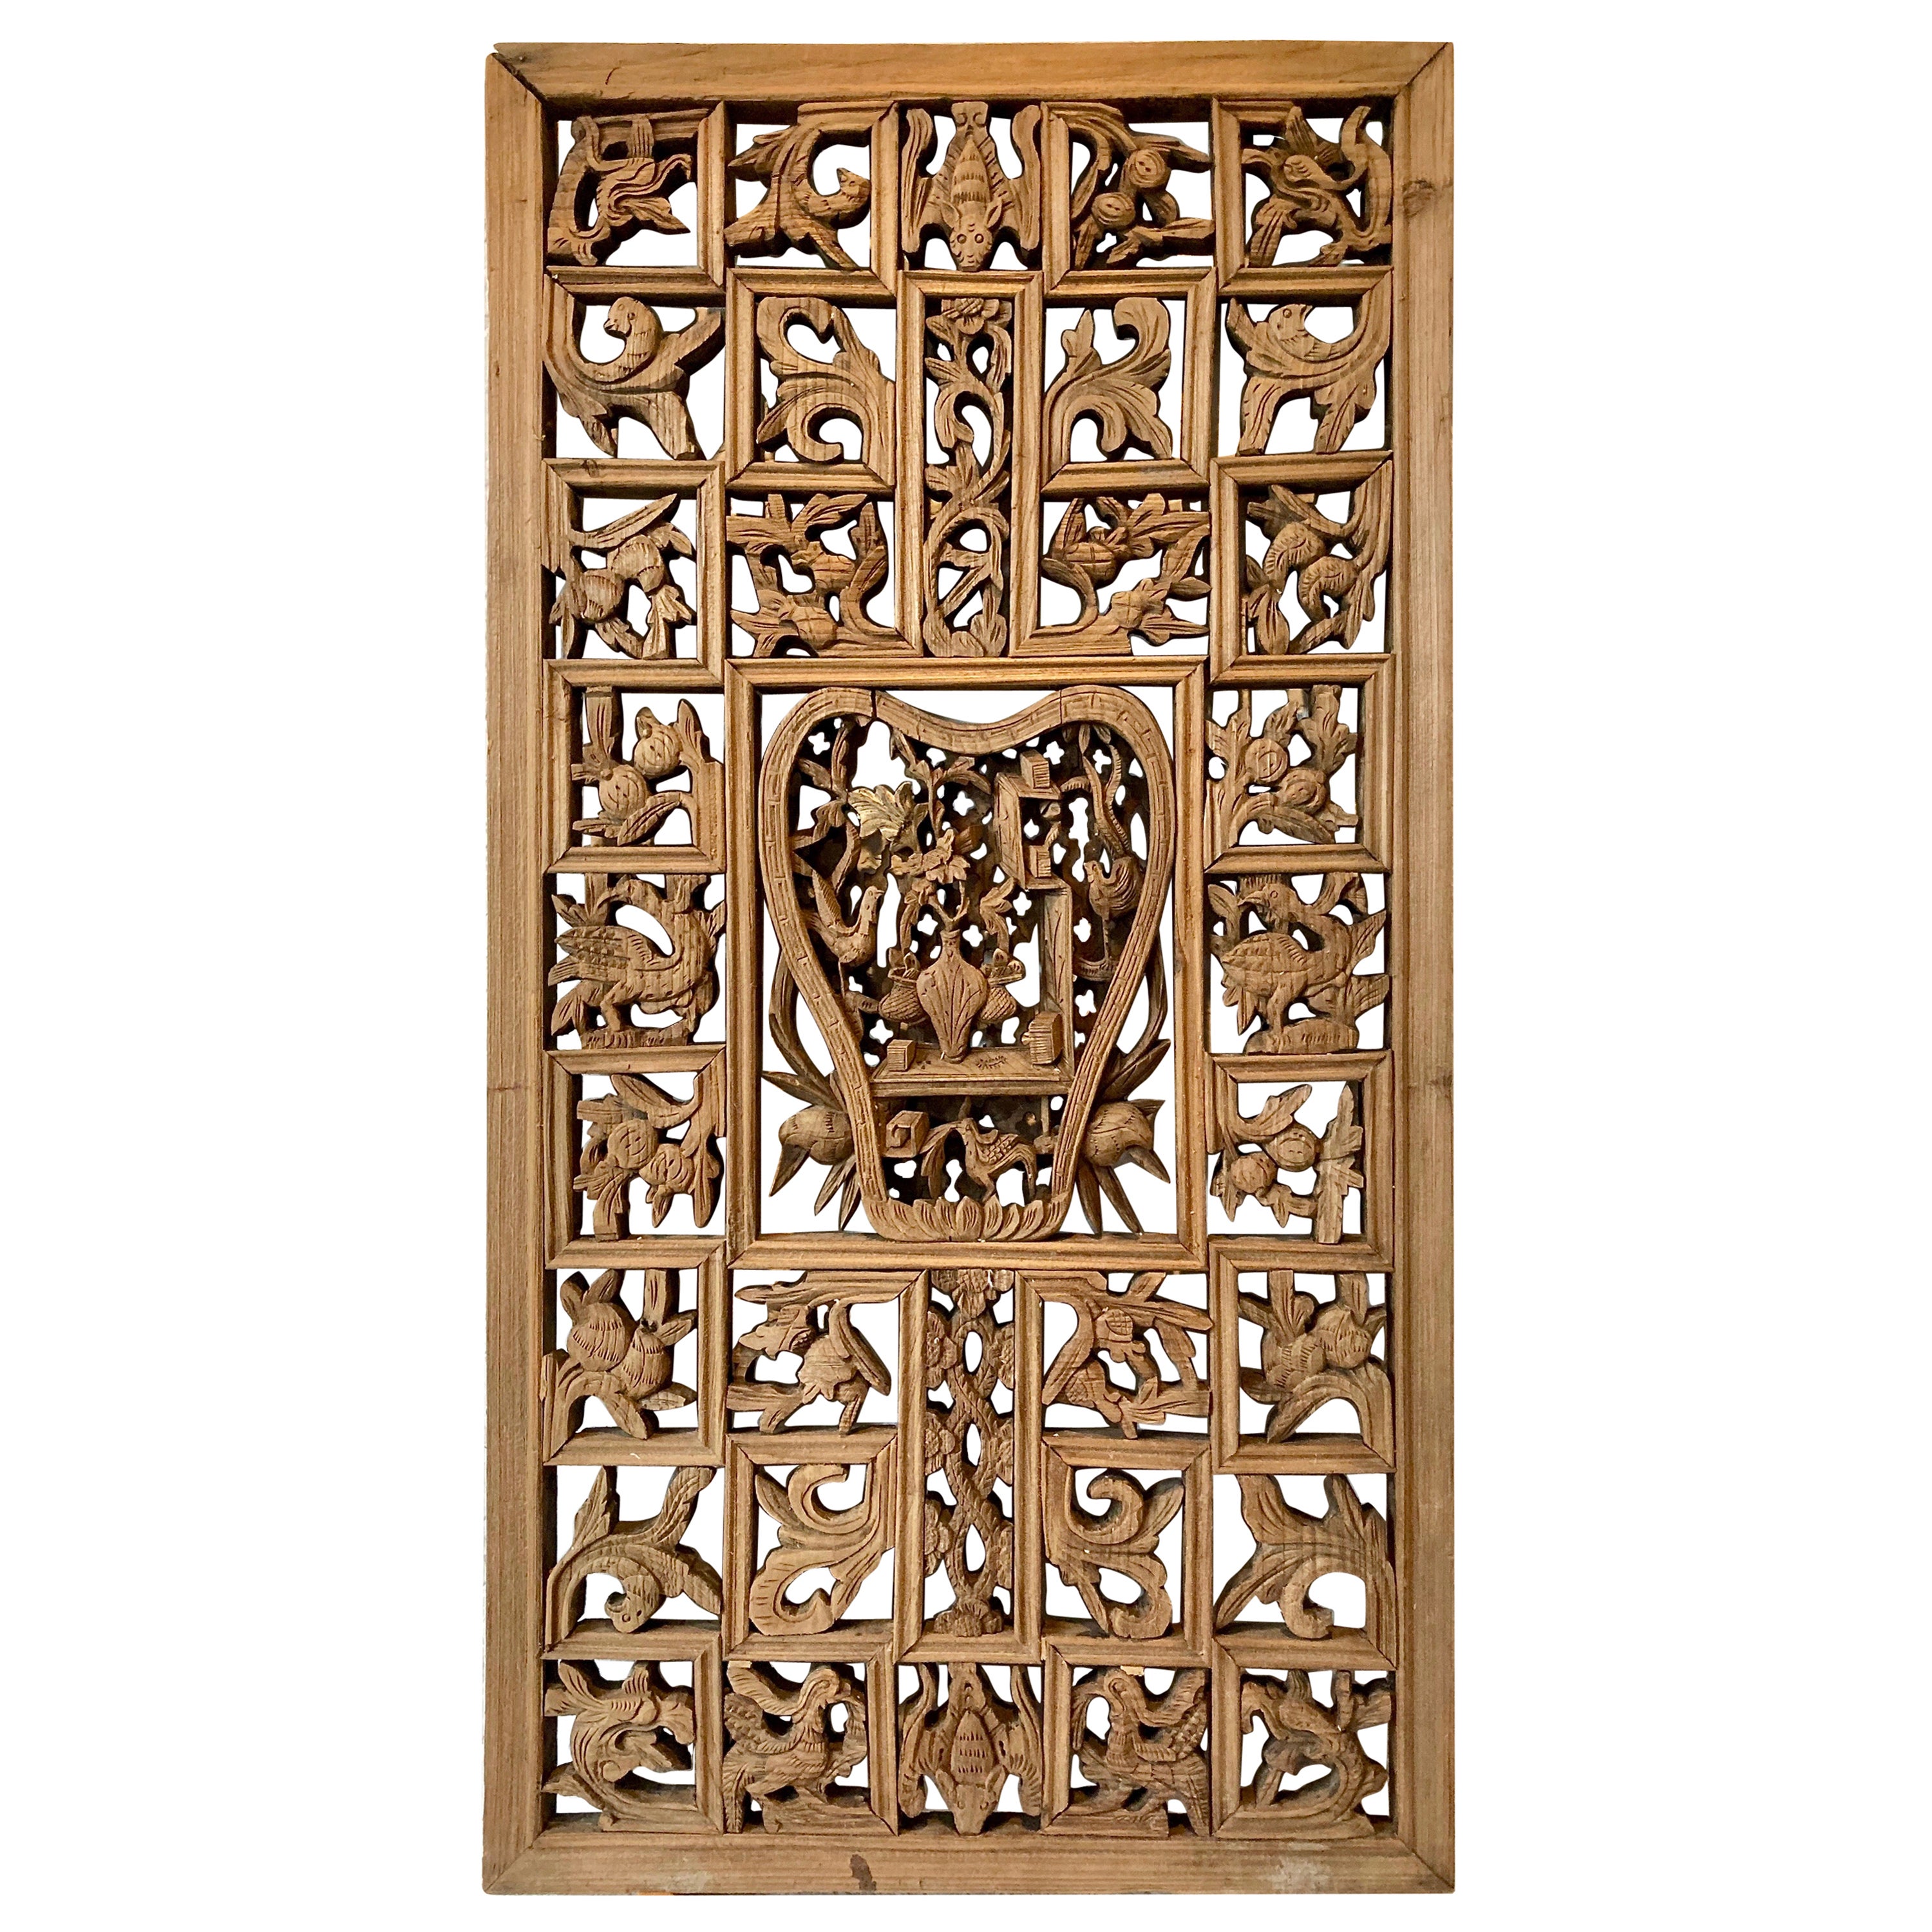 Chinese Decorative Lattice + Carved Wood Panel For Sale